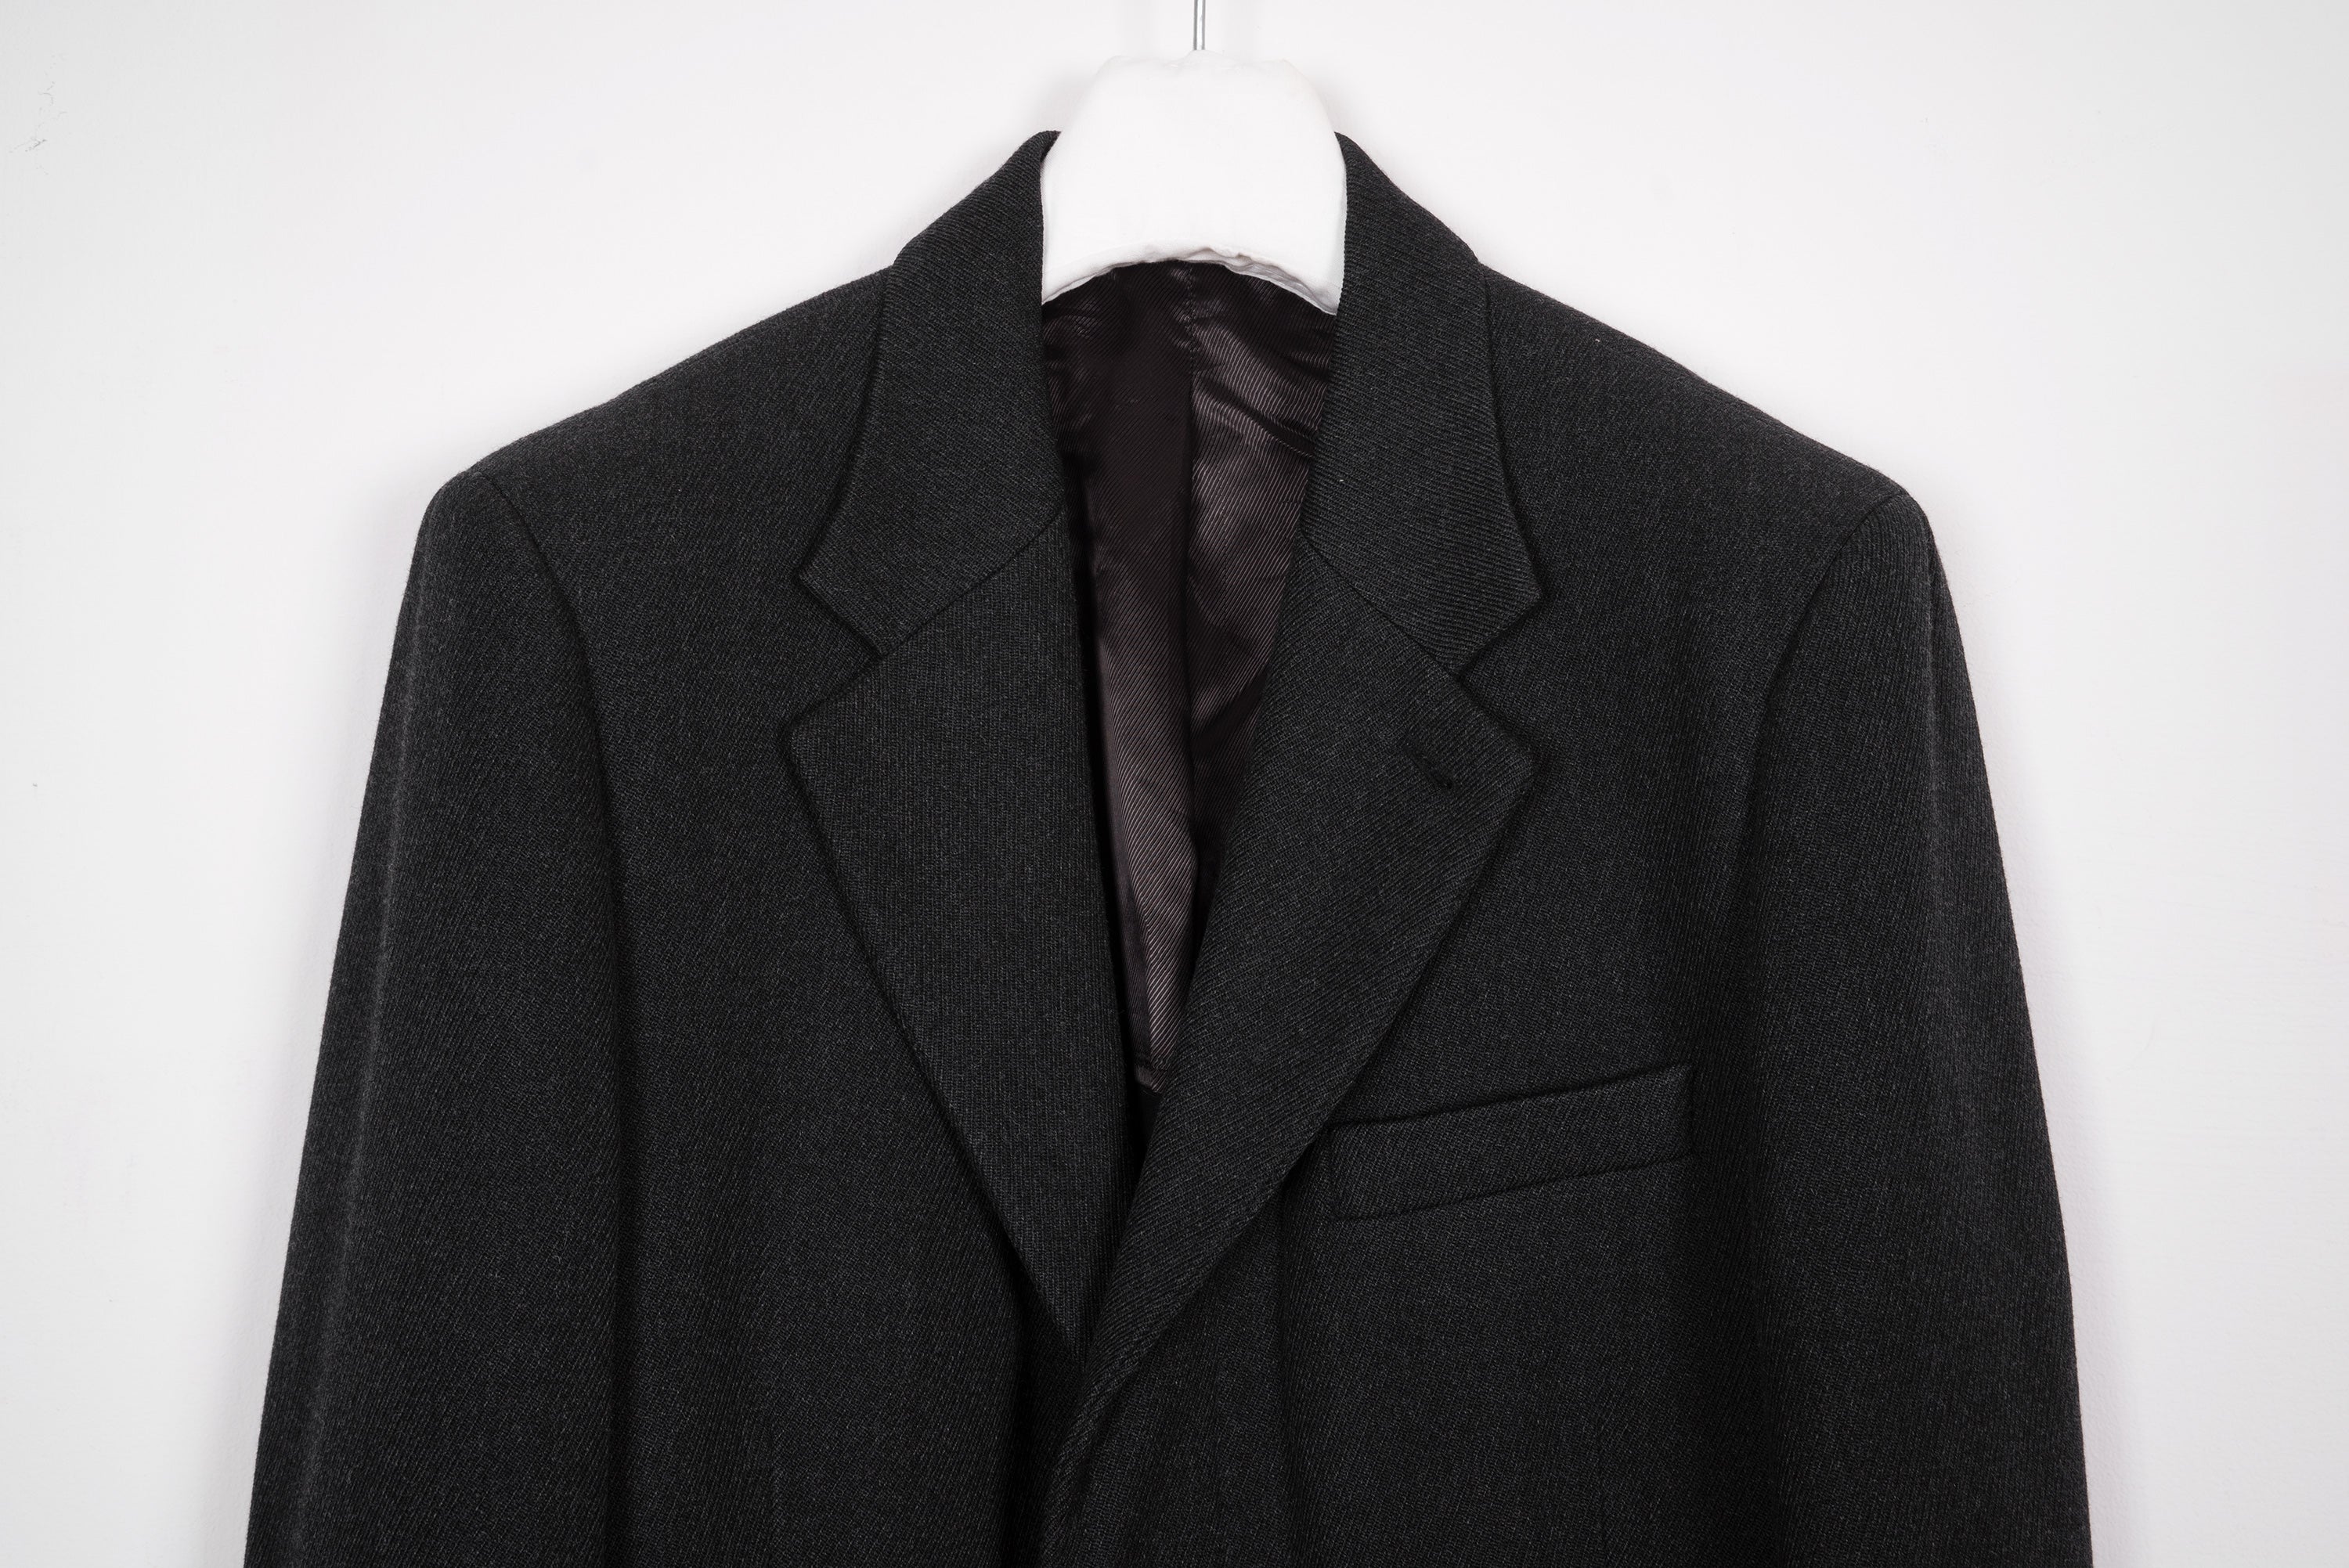 2003 A/W CHESTERFIELD COAT IN CAVALRY TWILL WOOL